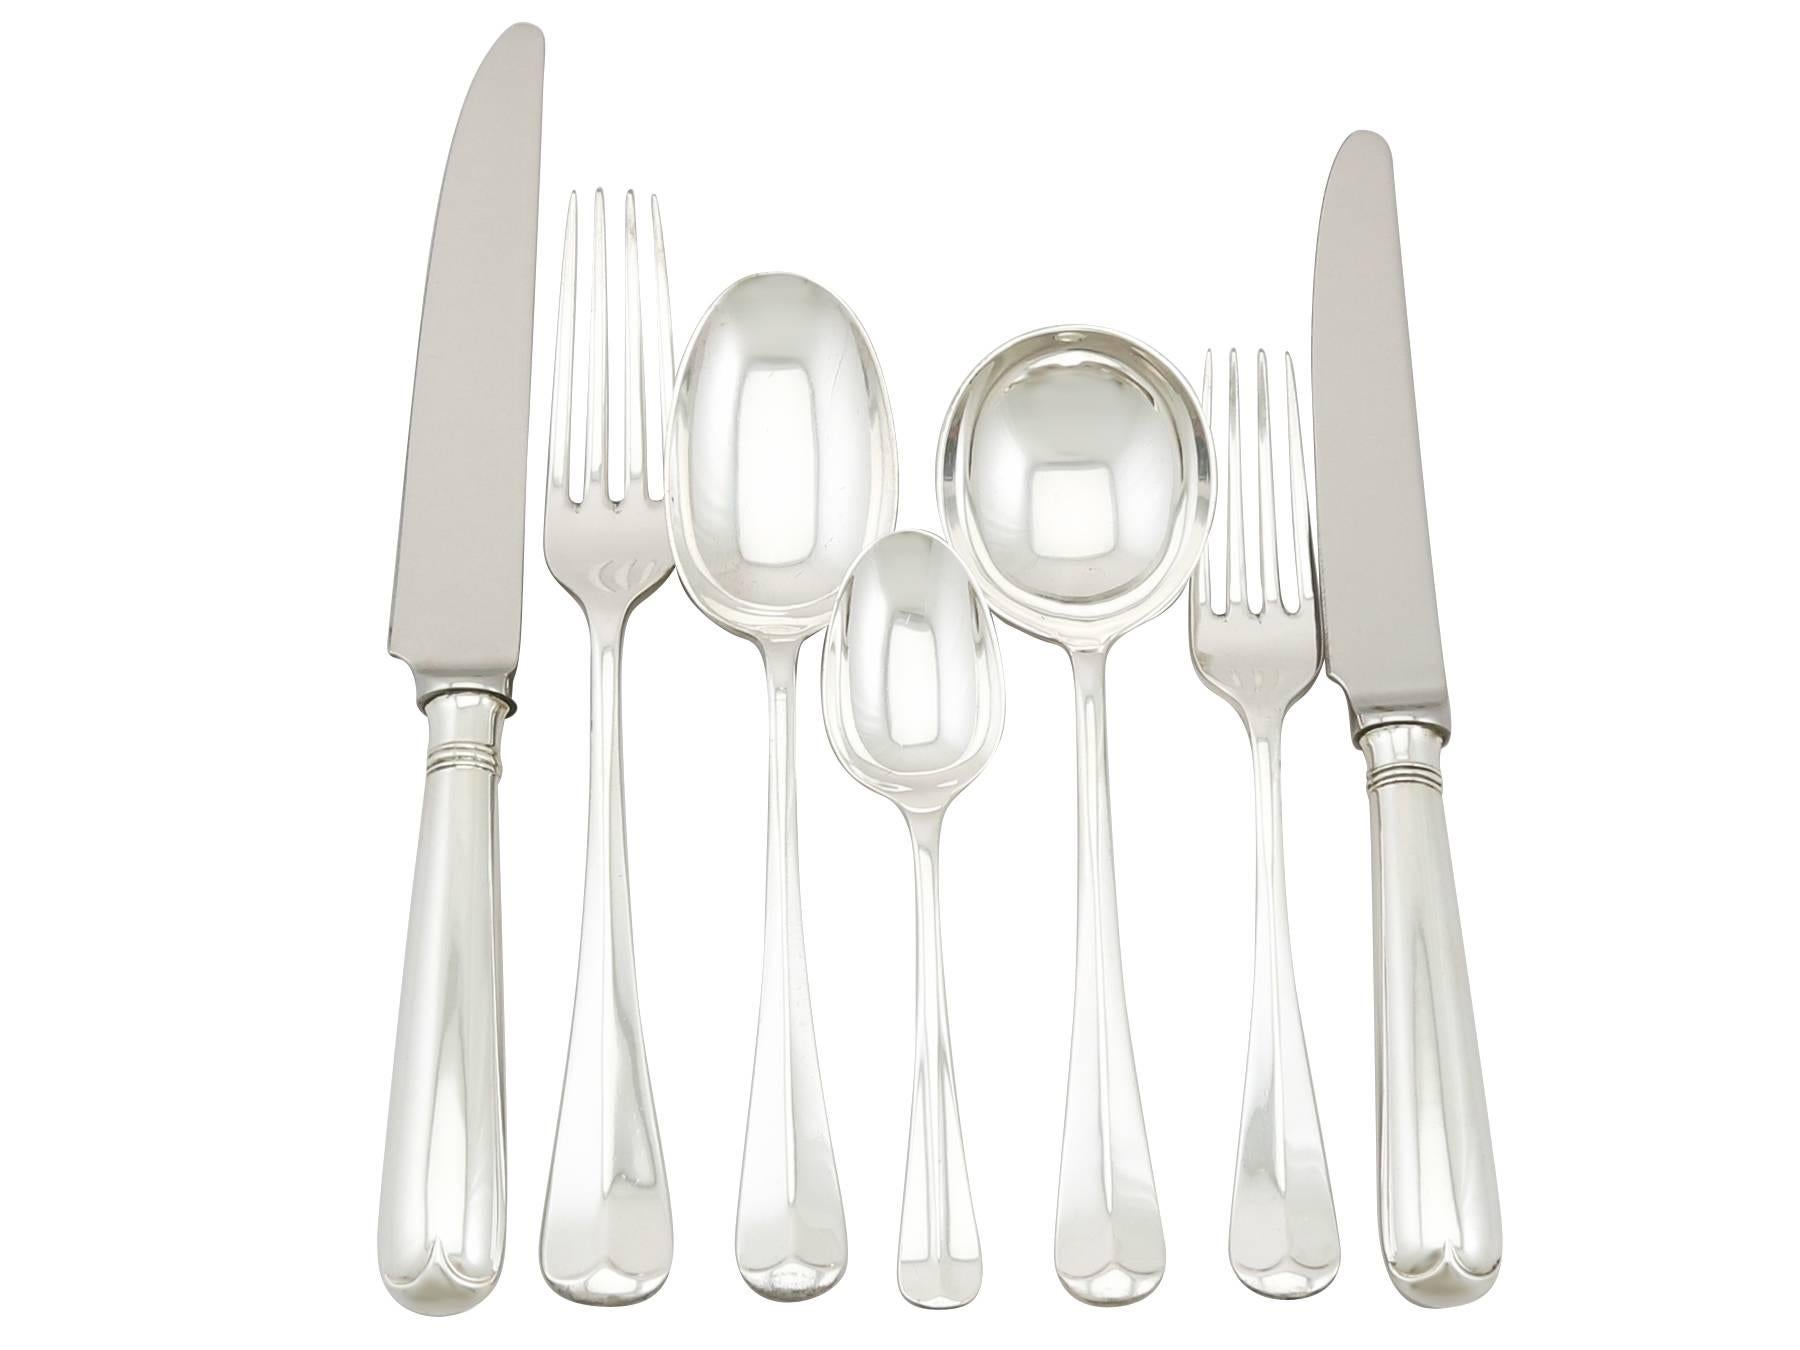 An exceptional, fine and impressive vintage George VI English sterling silver straight Hanoverian Rat Tail pattern canteen of cutlery for twelve persons; an addition to our antique flatware sets.

The pieces of this exceptional vintage George VI